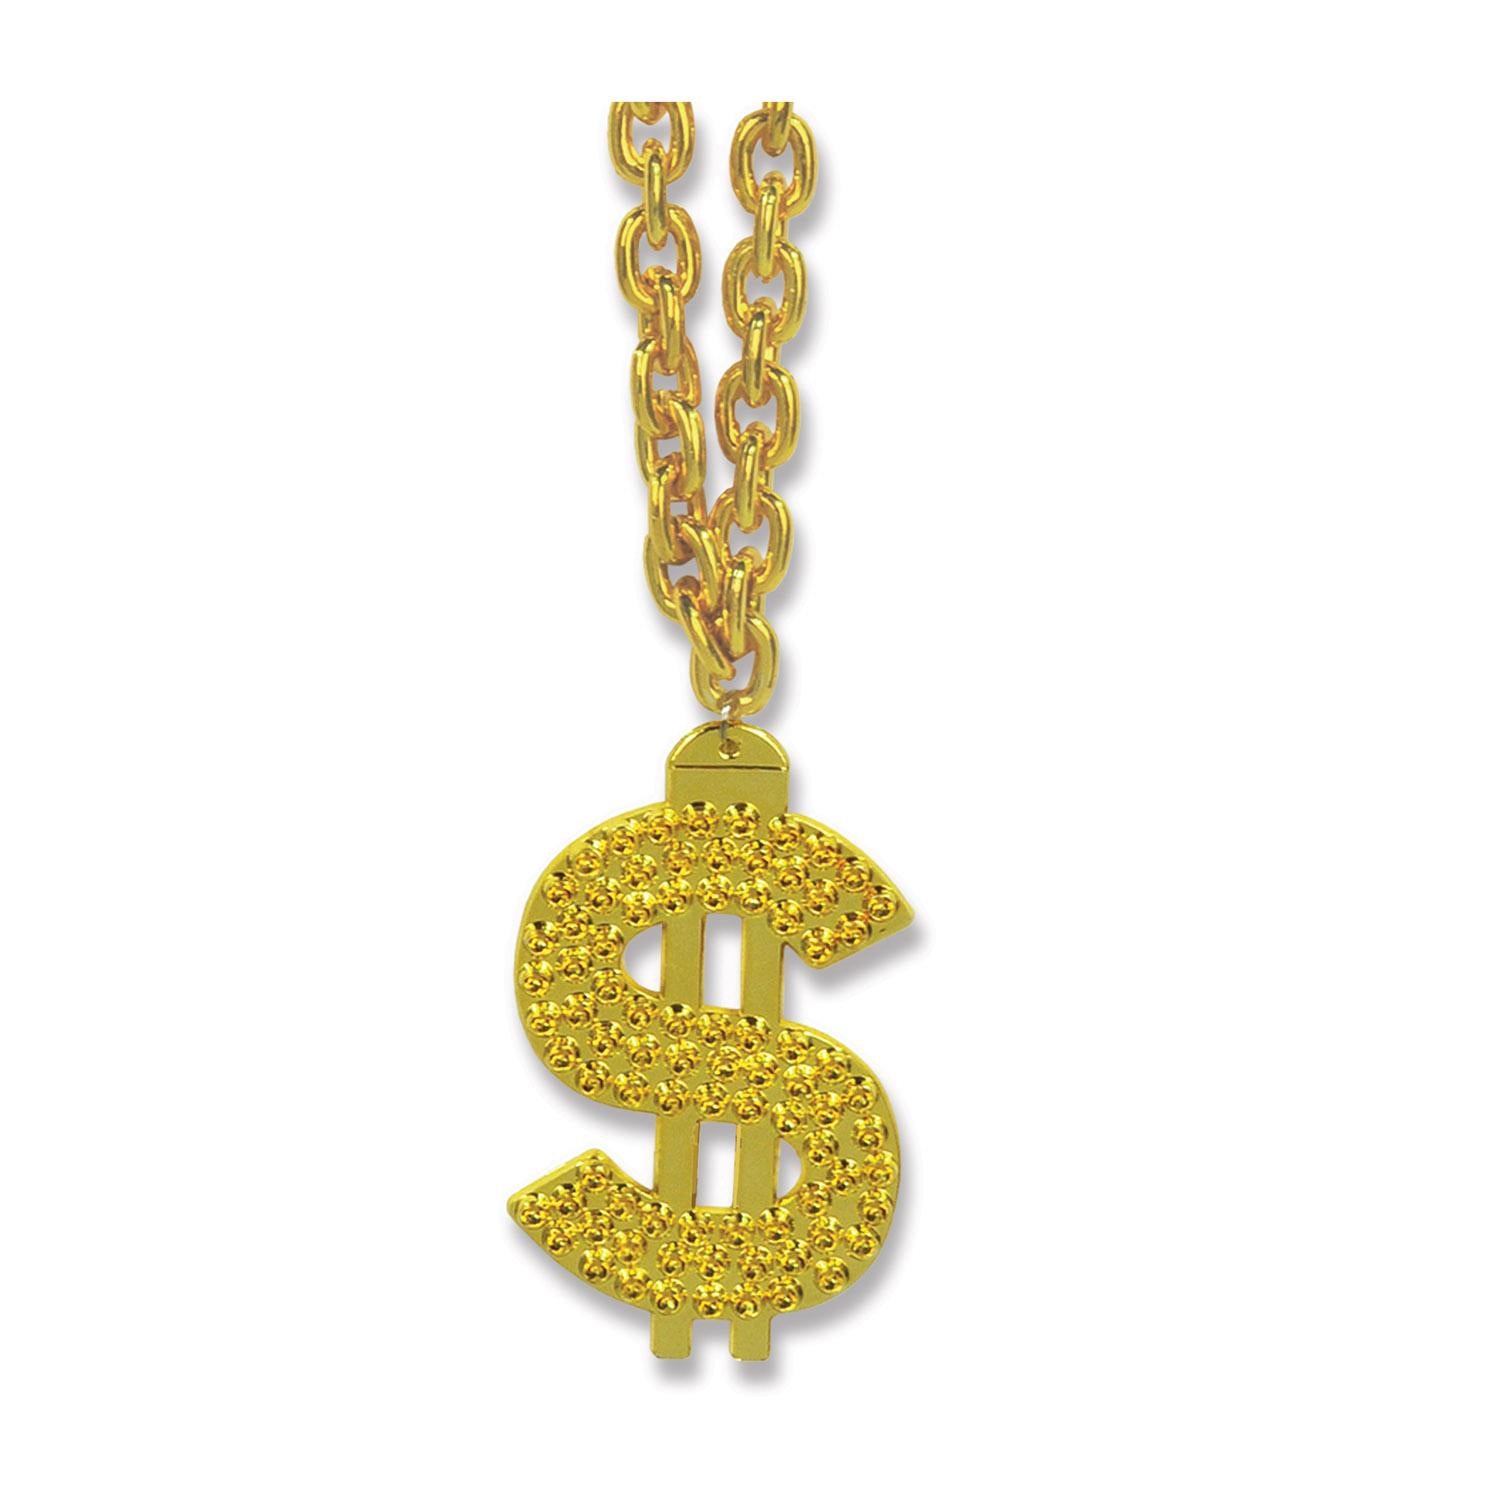 Gold Chain Party Bead Necklaces with $ Medallion (12 per Case)